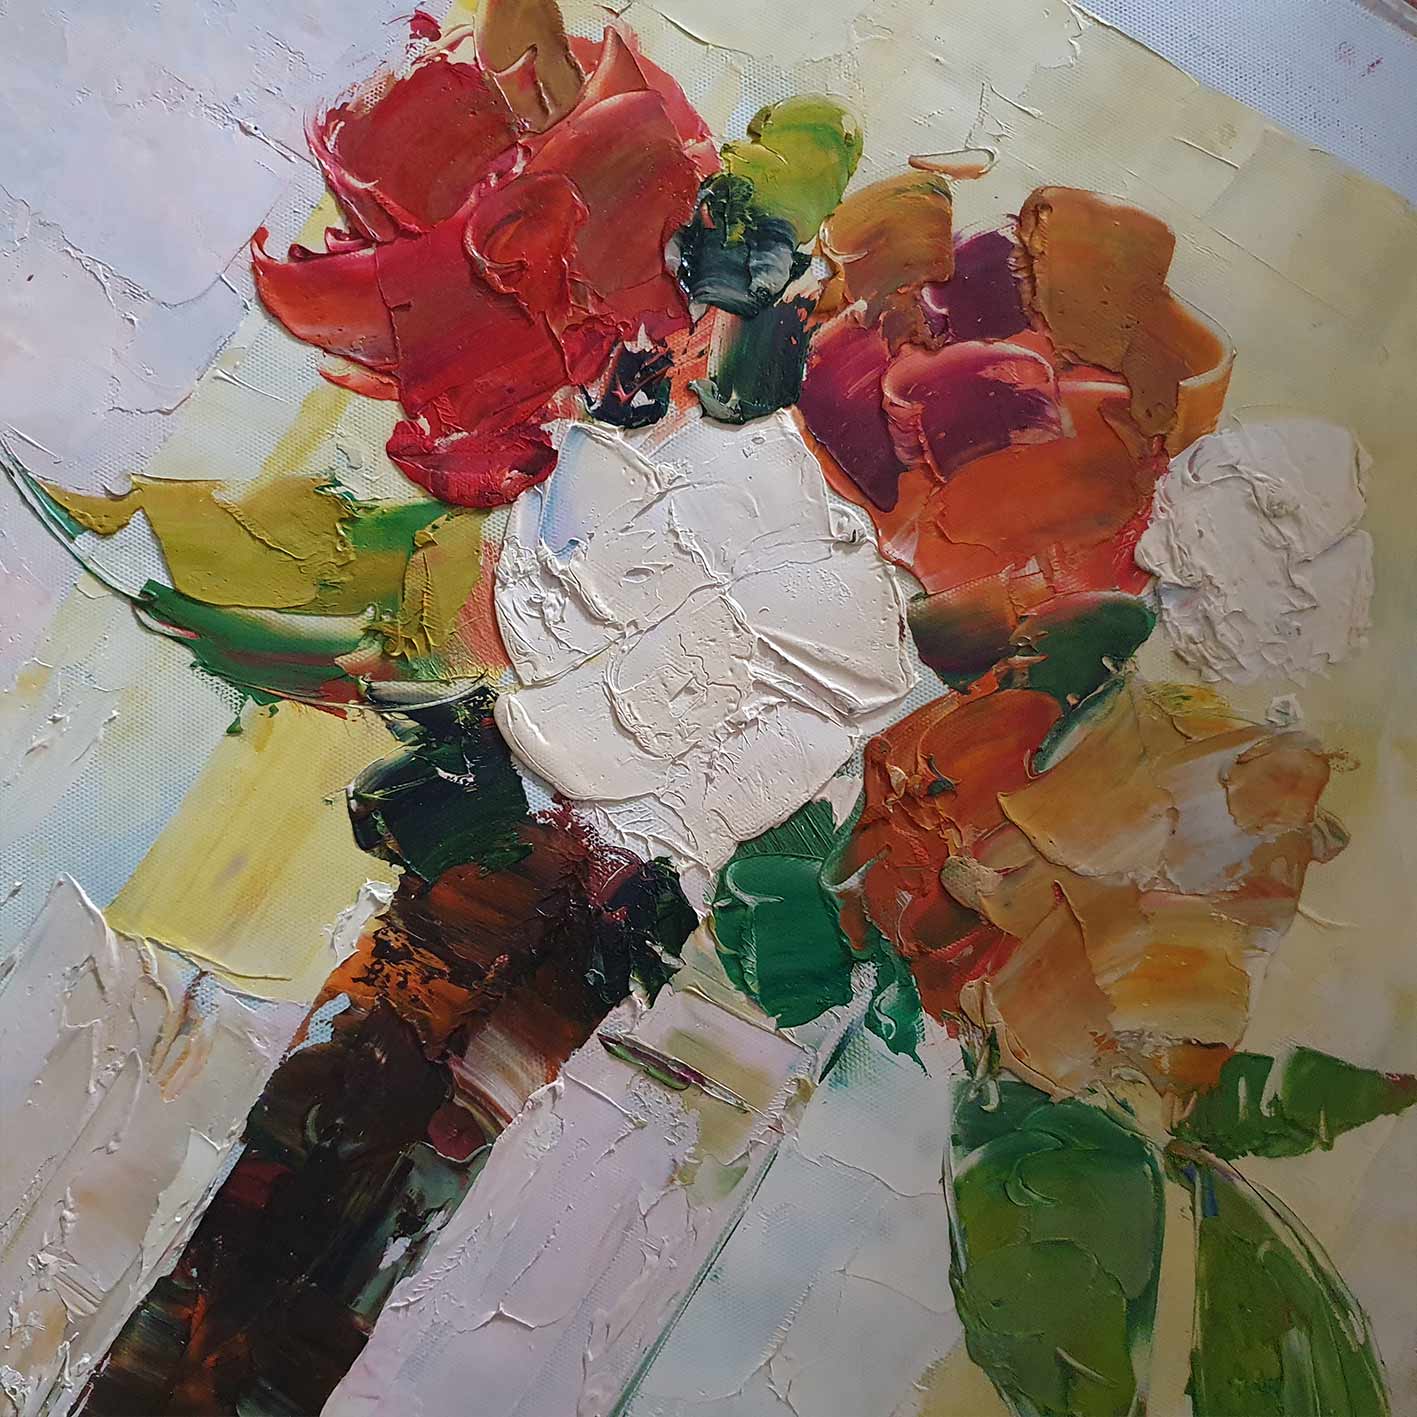 Painting Palette Knife Flowers!